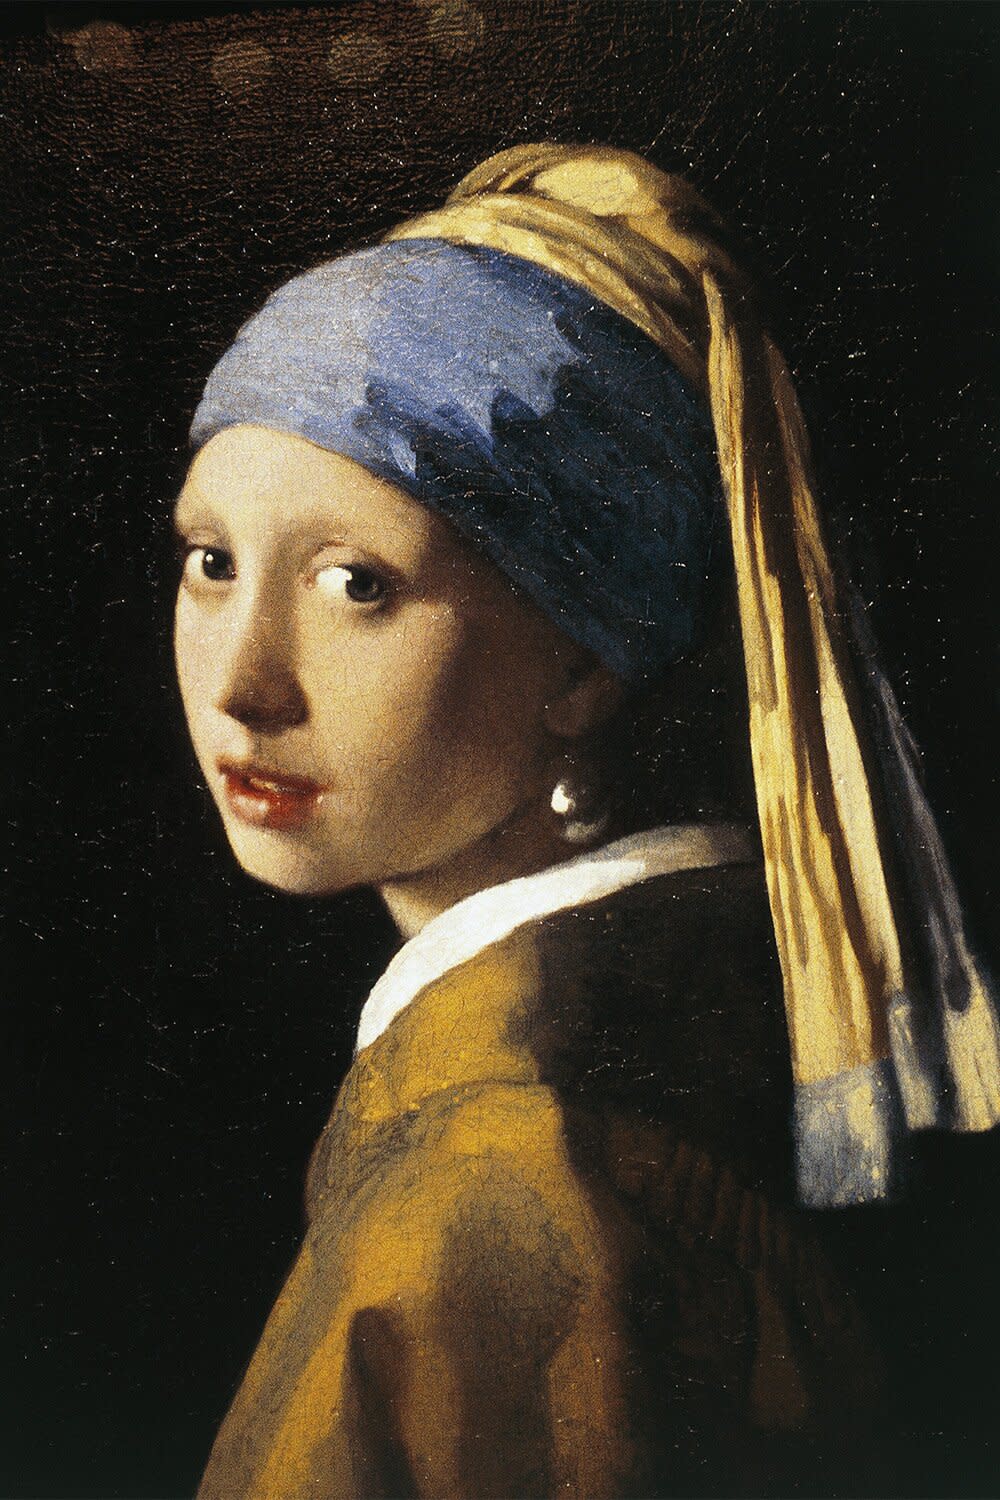 UNSPECIFIED - MARCH 24: Girl with a Pearl Earring, 1665-1666, by Johannes Vermeer (1632-1675), oil on canvas, 44.5x39 cm. The Hague, Mauritshuis (Art Museum) (Photo by DeAgostini/Getty Images)